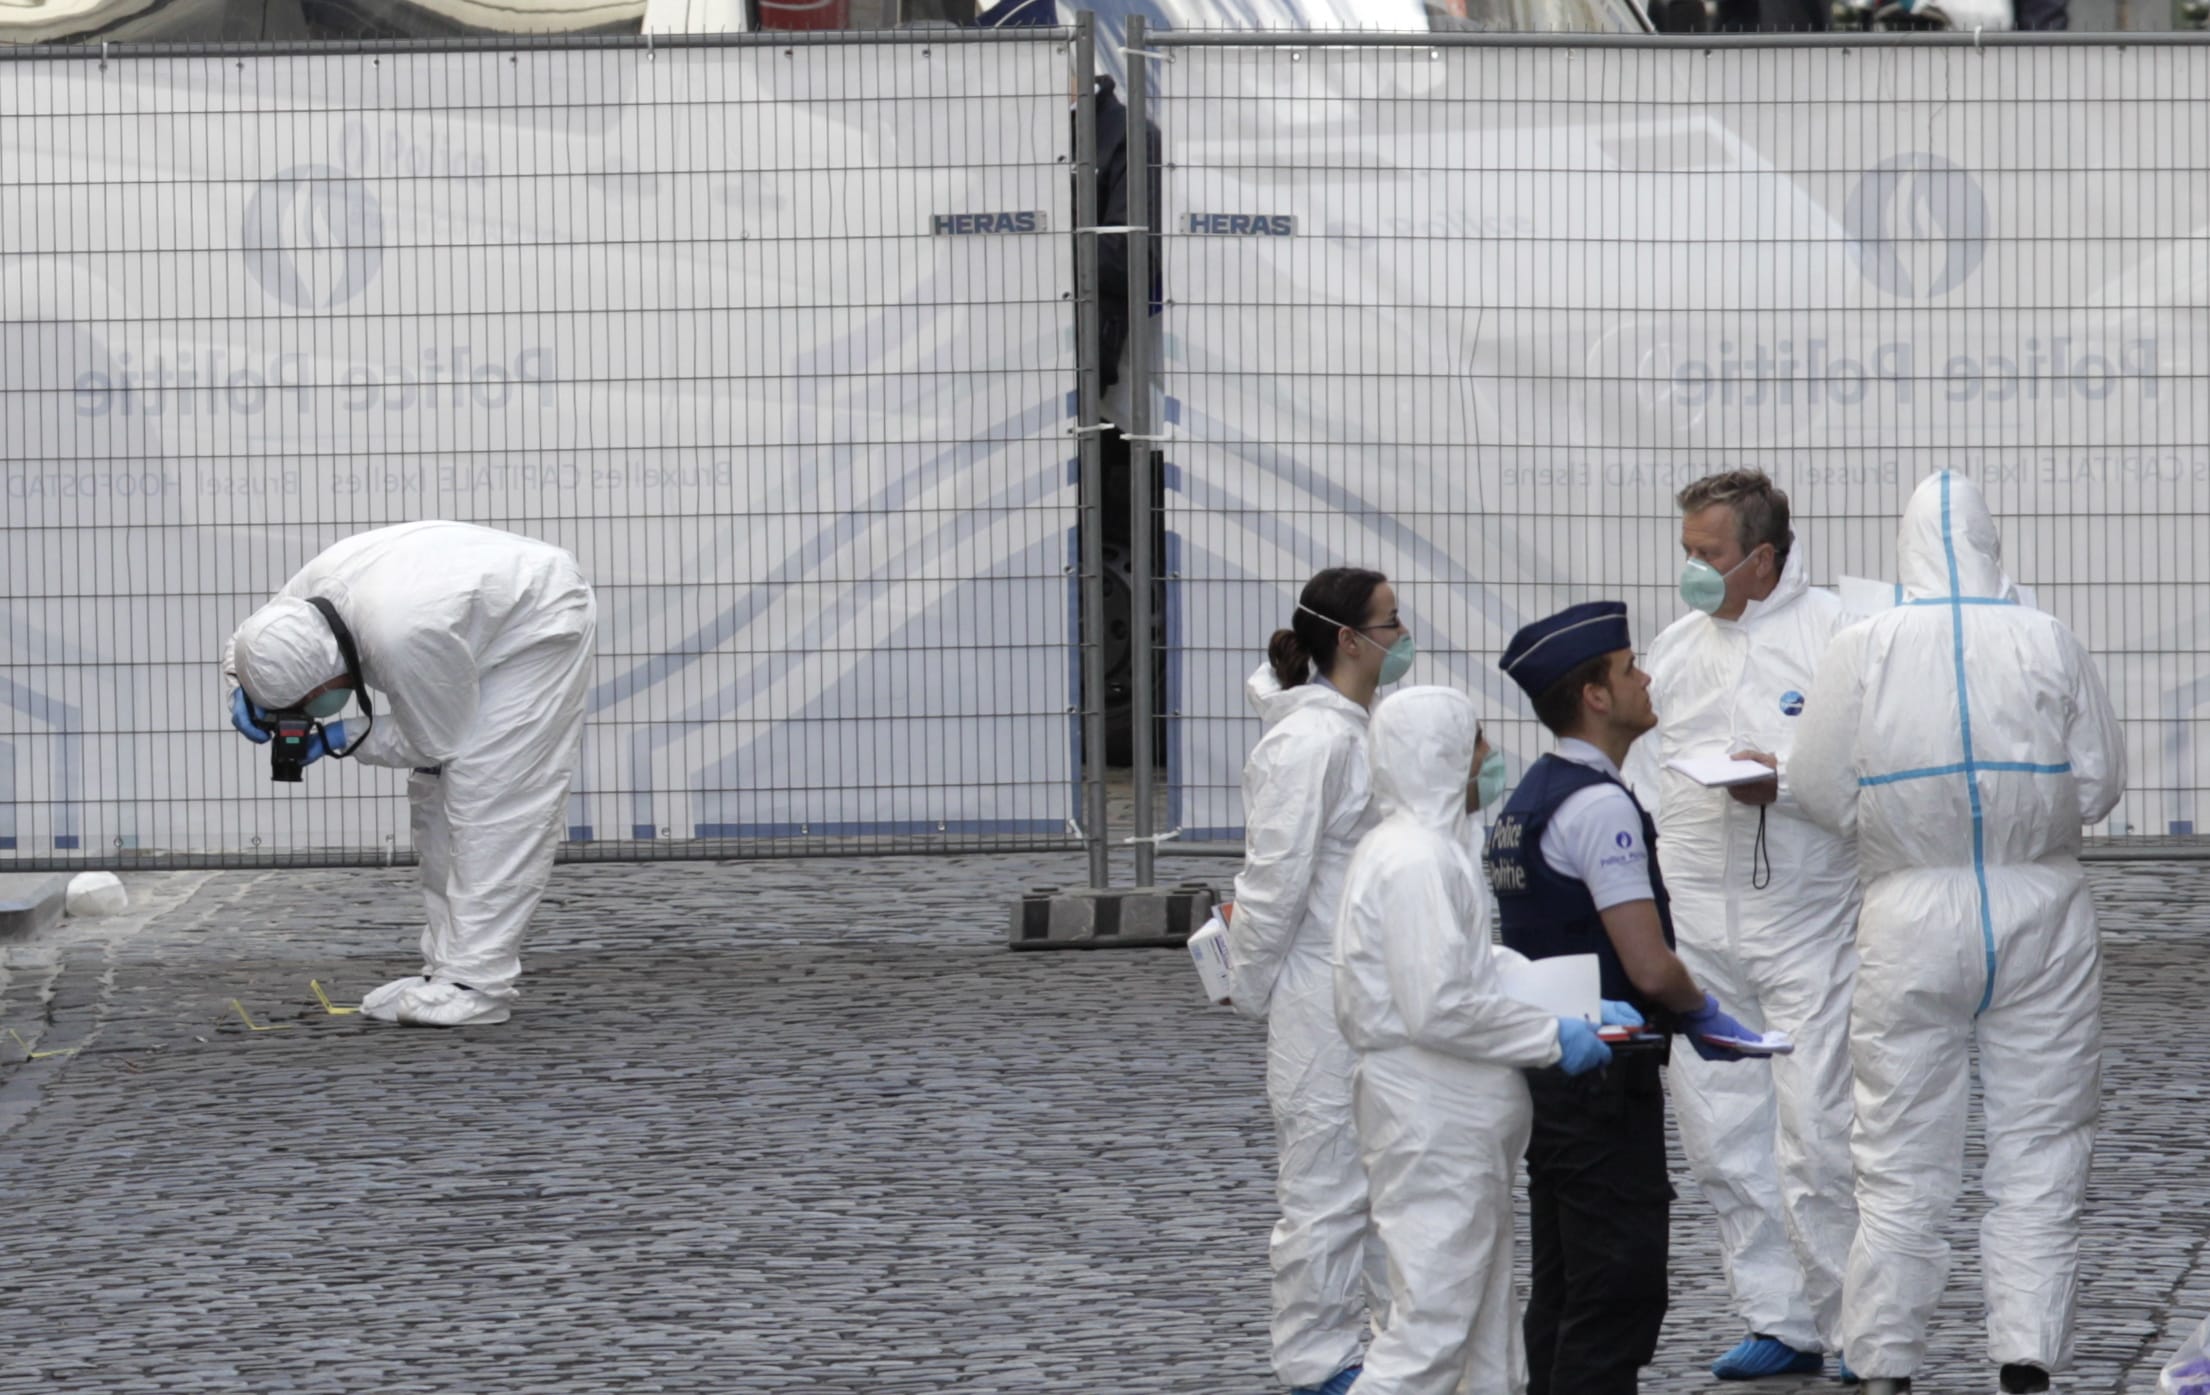 Forensic experts examine the site of a shooting at the Jewish Museum on Saturday in Brussels.